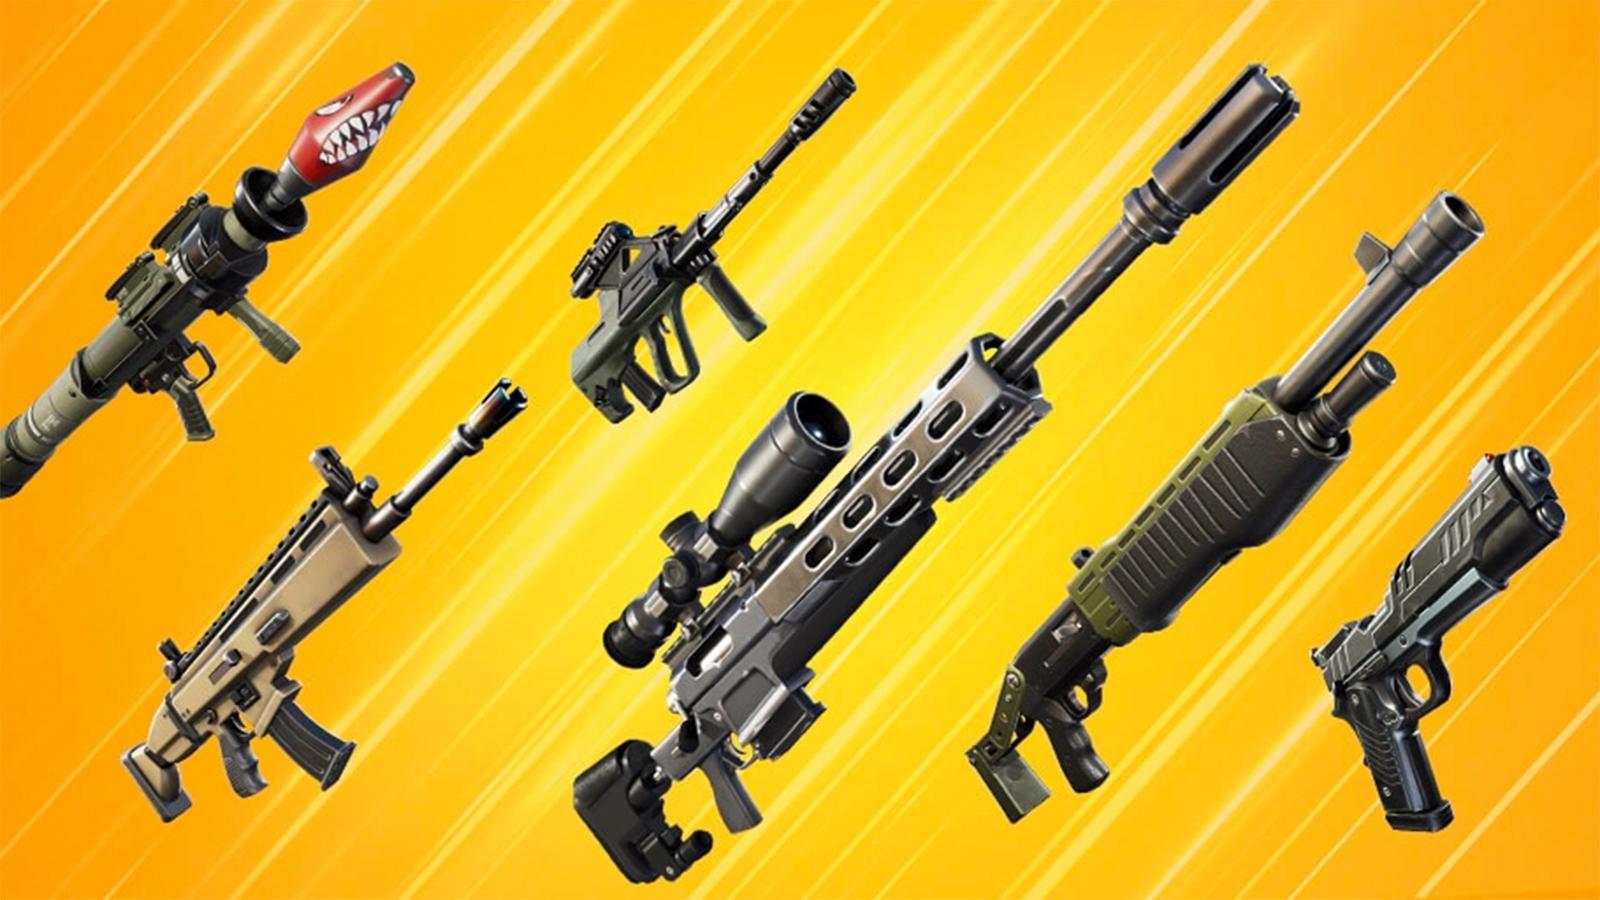 A poster for Fortnite Solid Gold mode